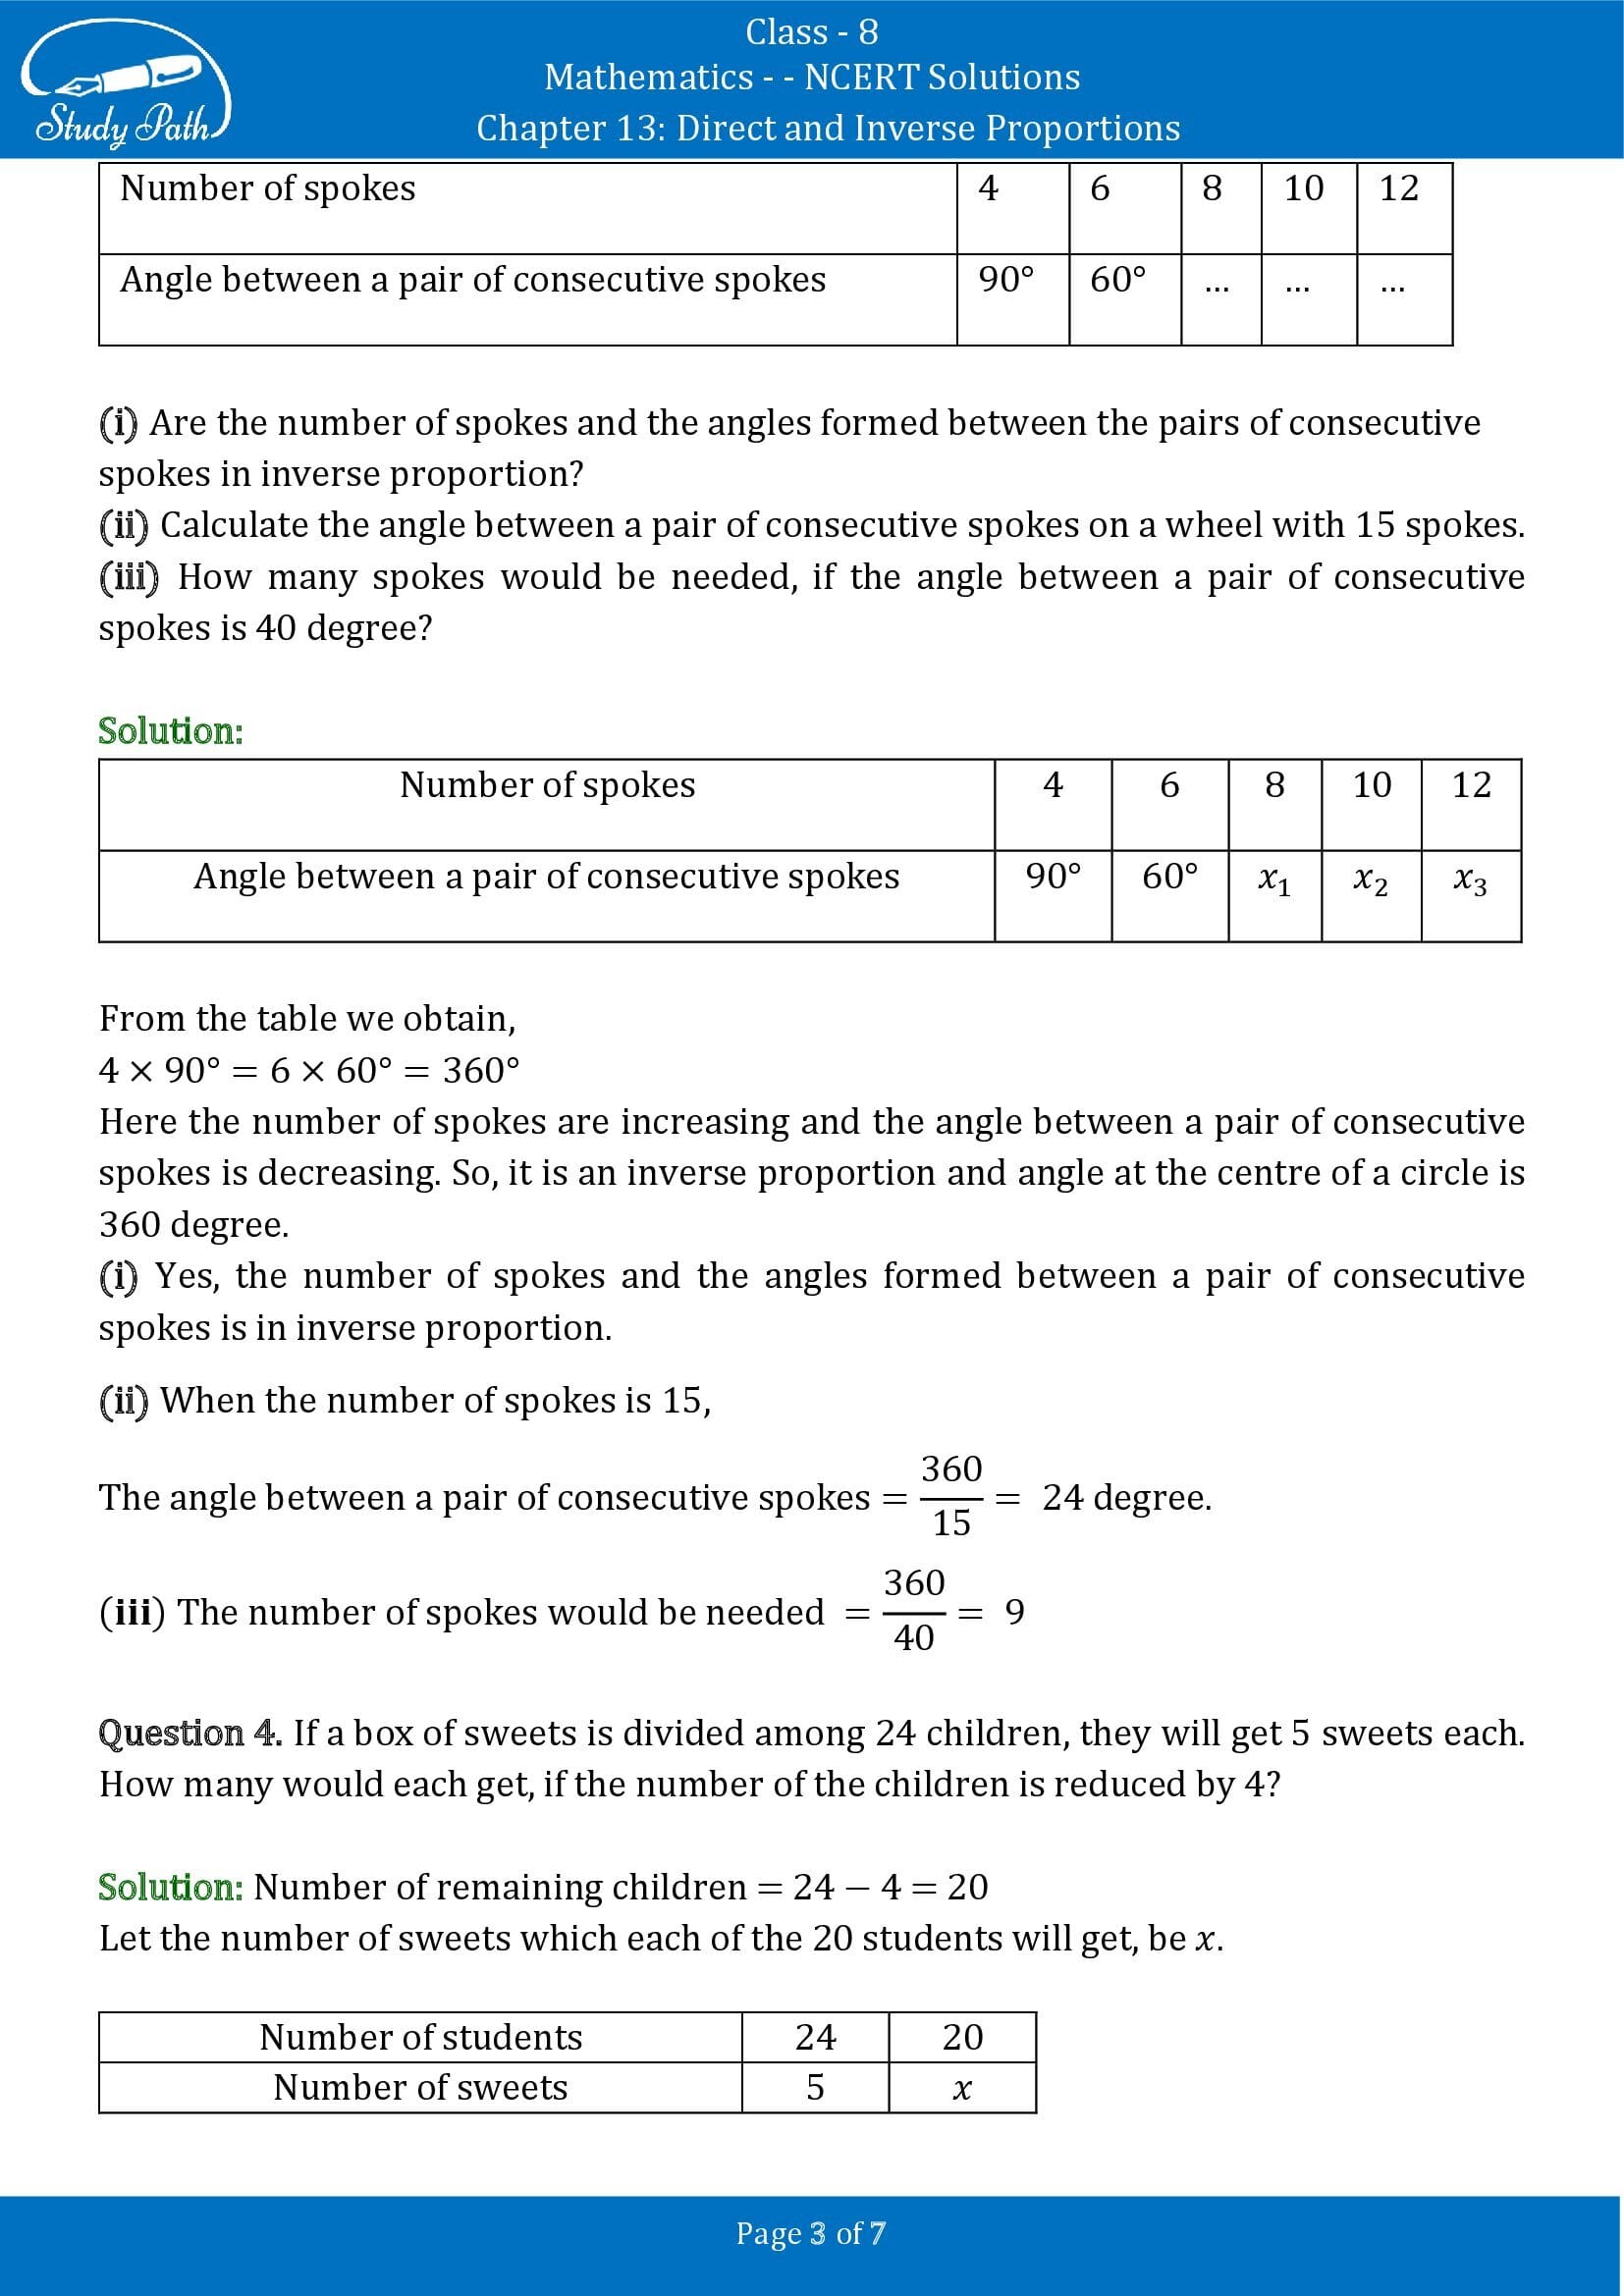 NCERT Solutions for Class 8 Maths Chapter 13 Direct and Inverse Proportions Exercise 13.2 00003